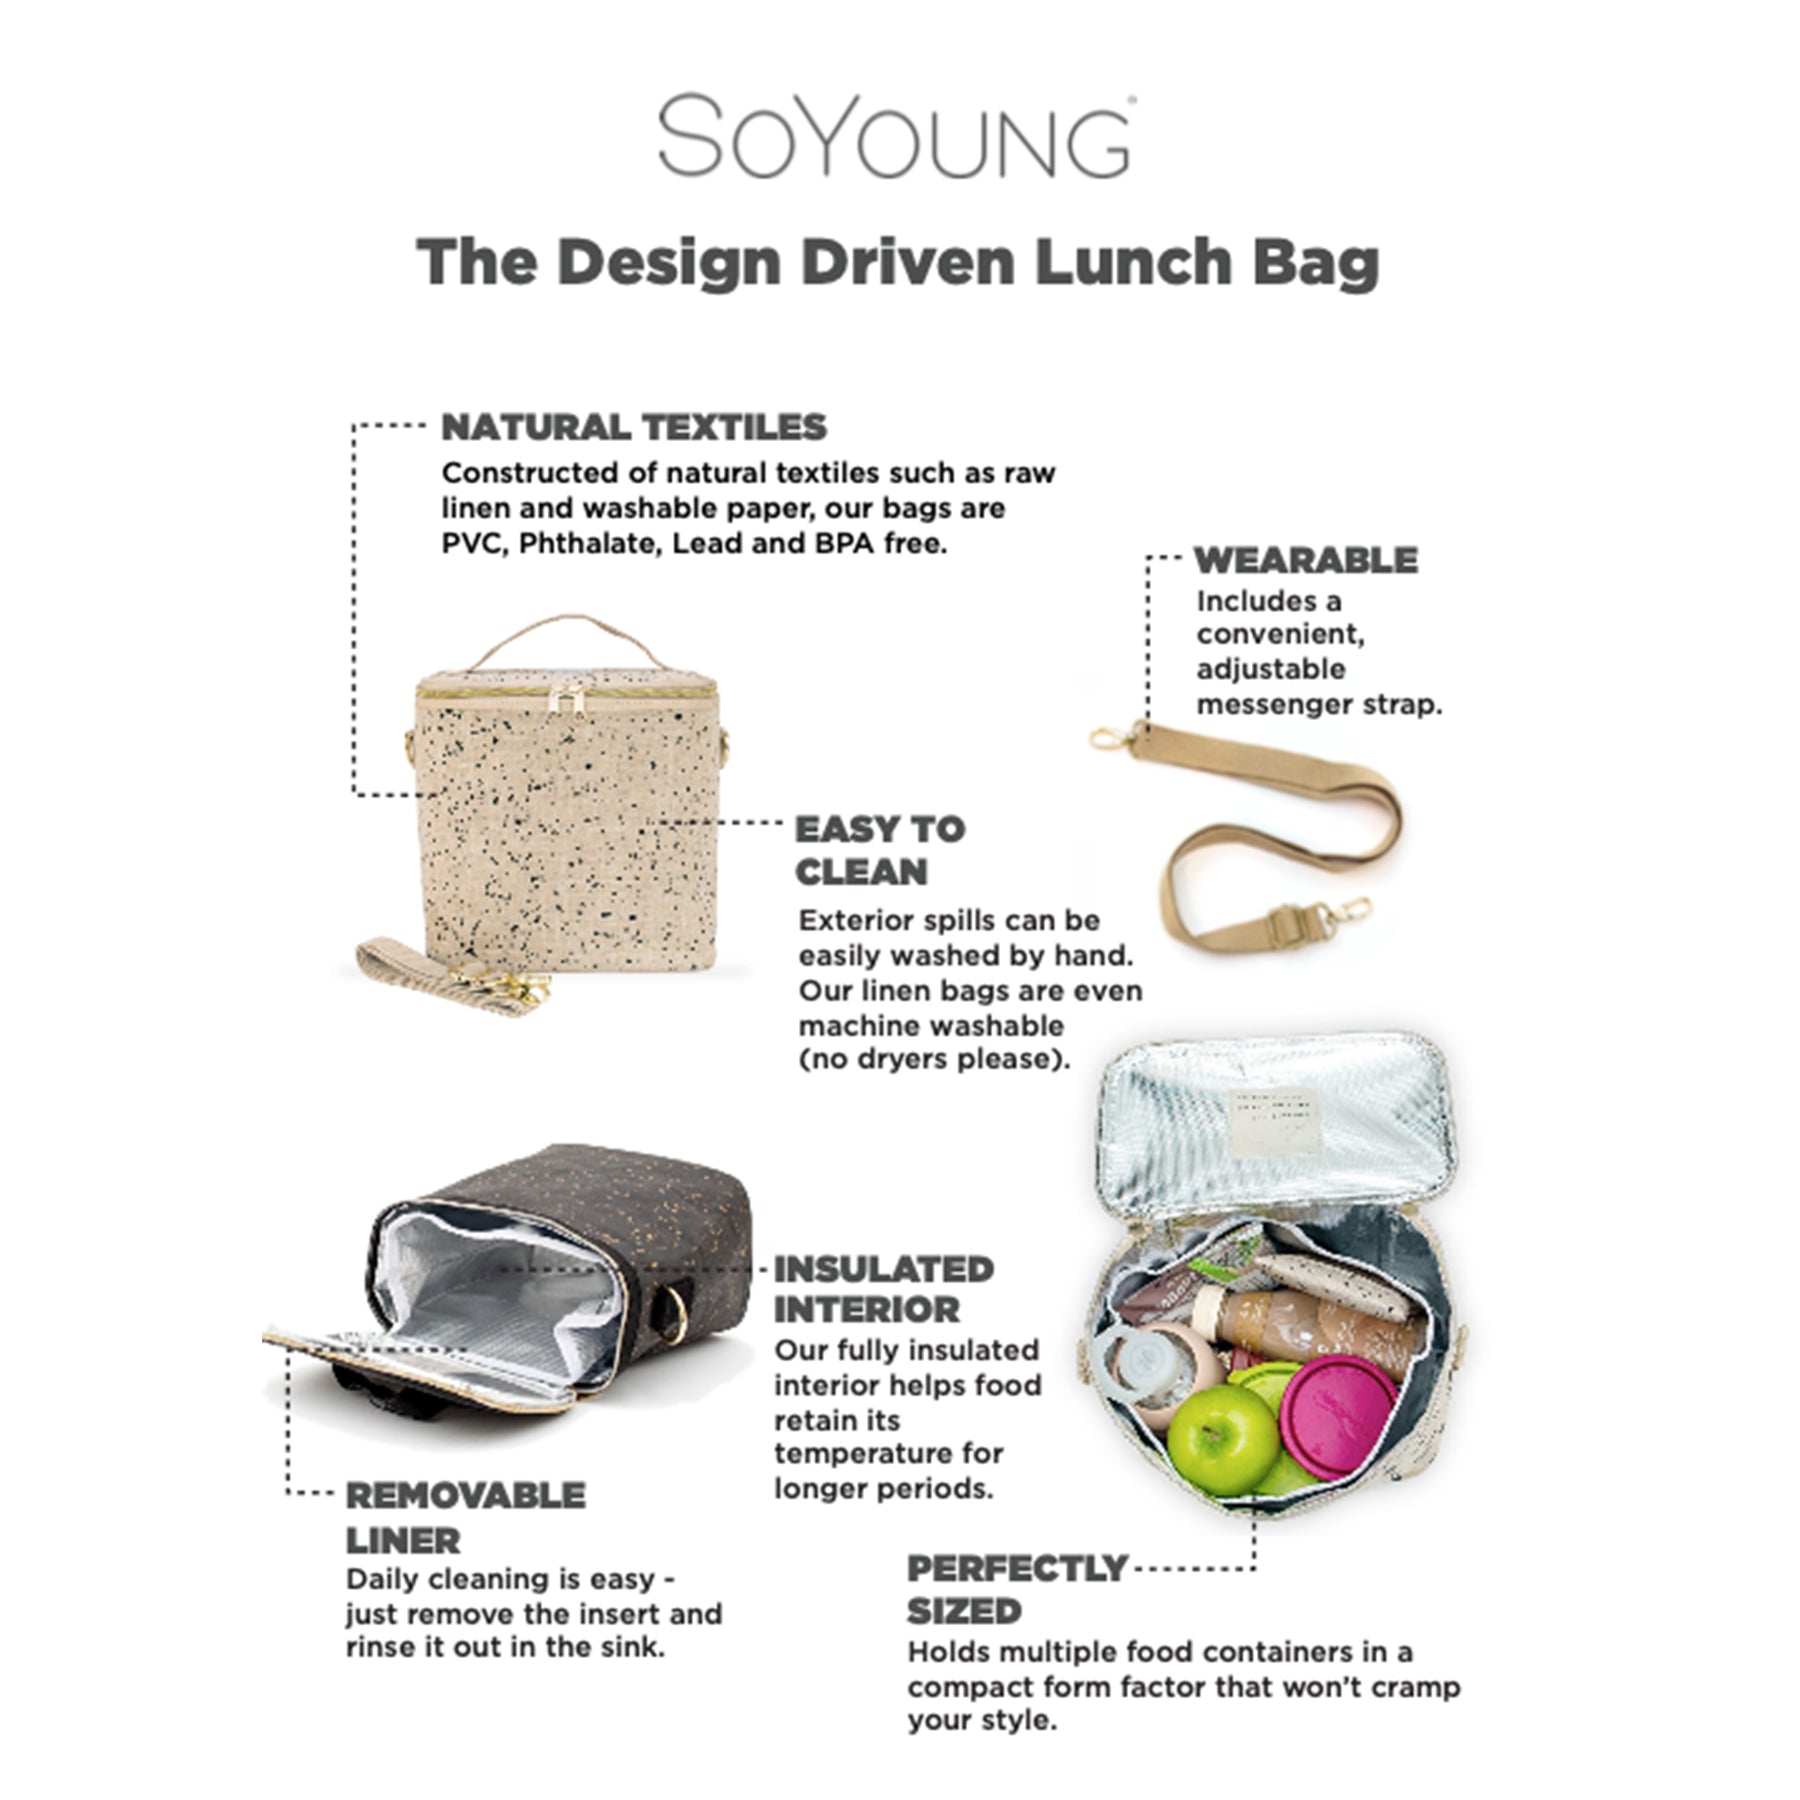 Adult lunch bag benefits: natural textiles, adjustable strap, easy clean, insulated, removable liner, perfectly sized.